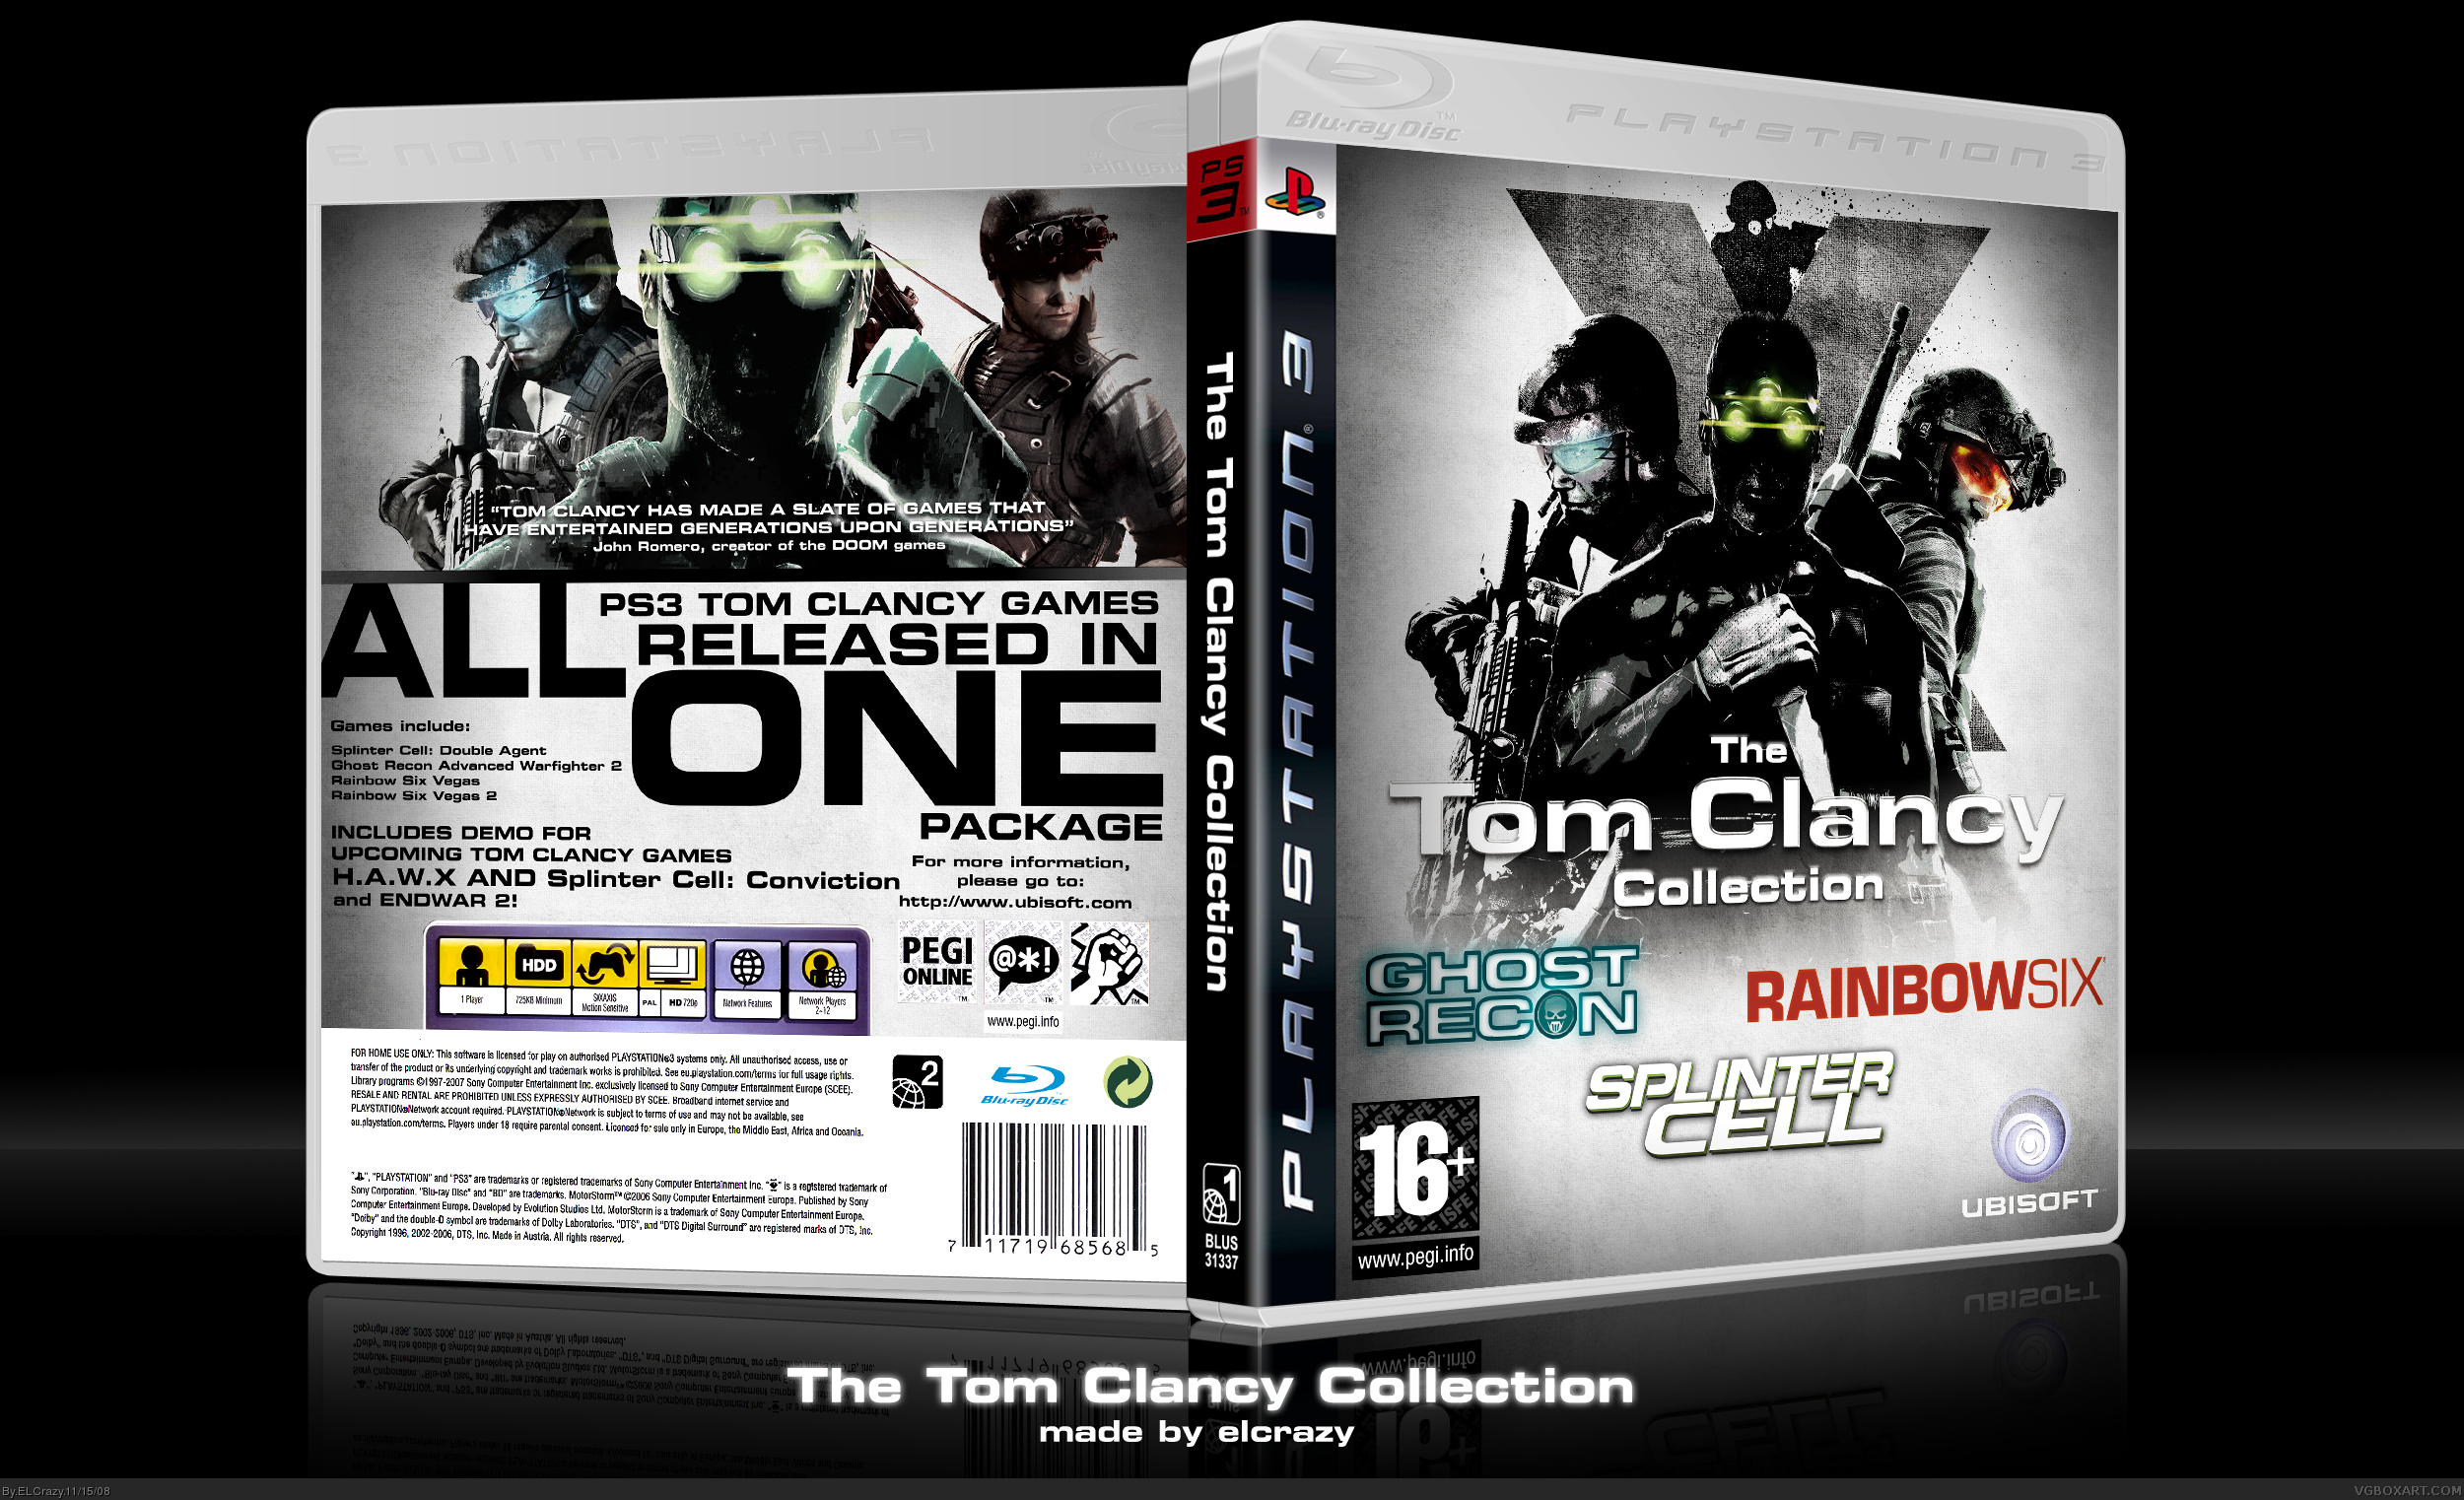 The Tom Clancy Collection box cover